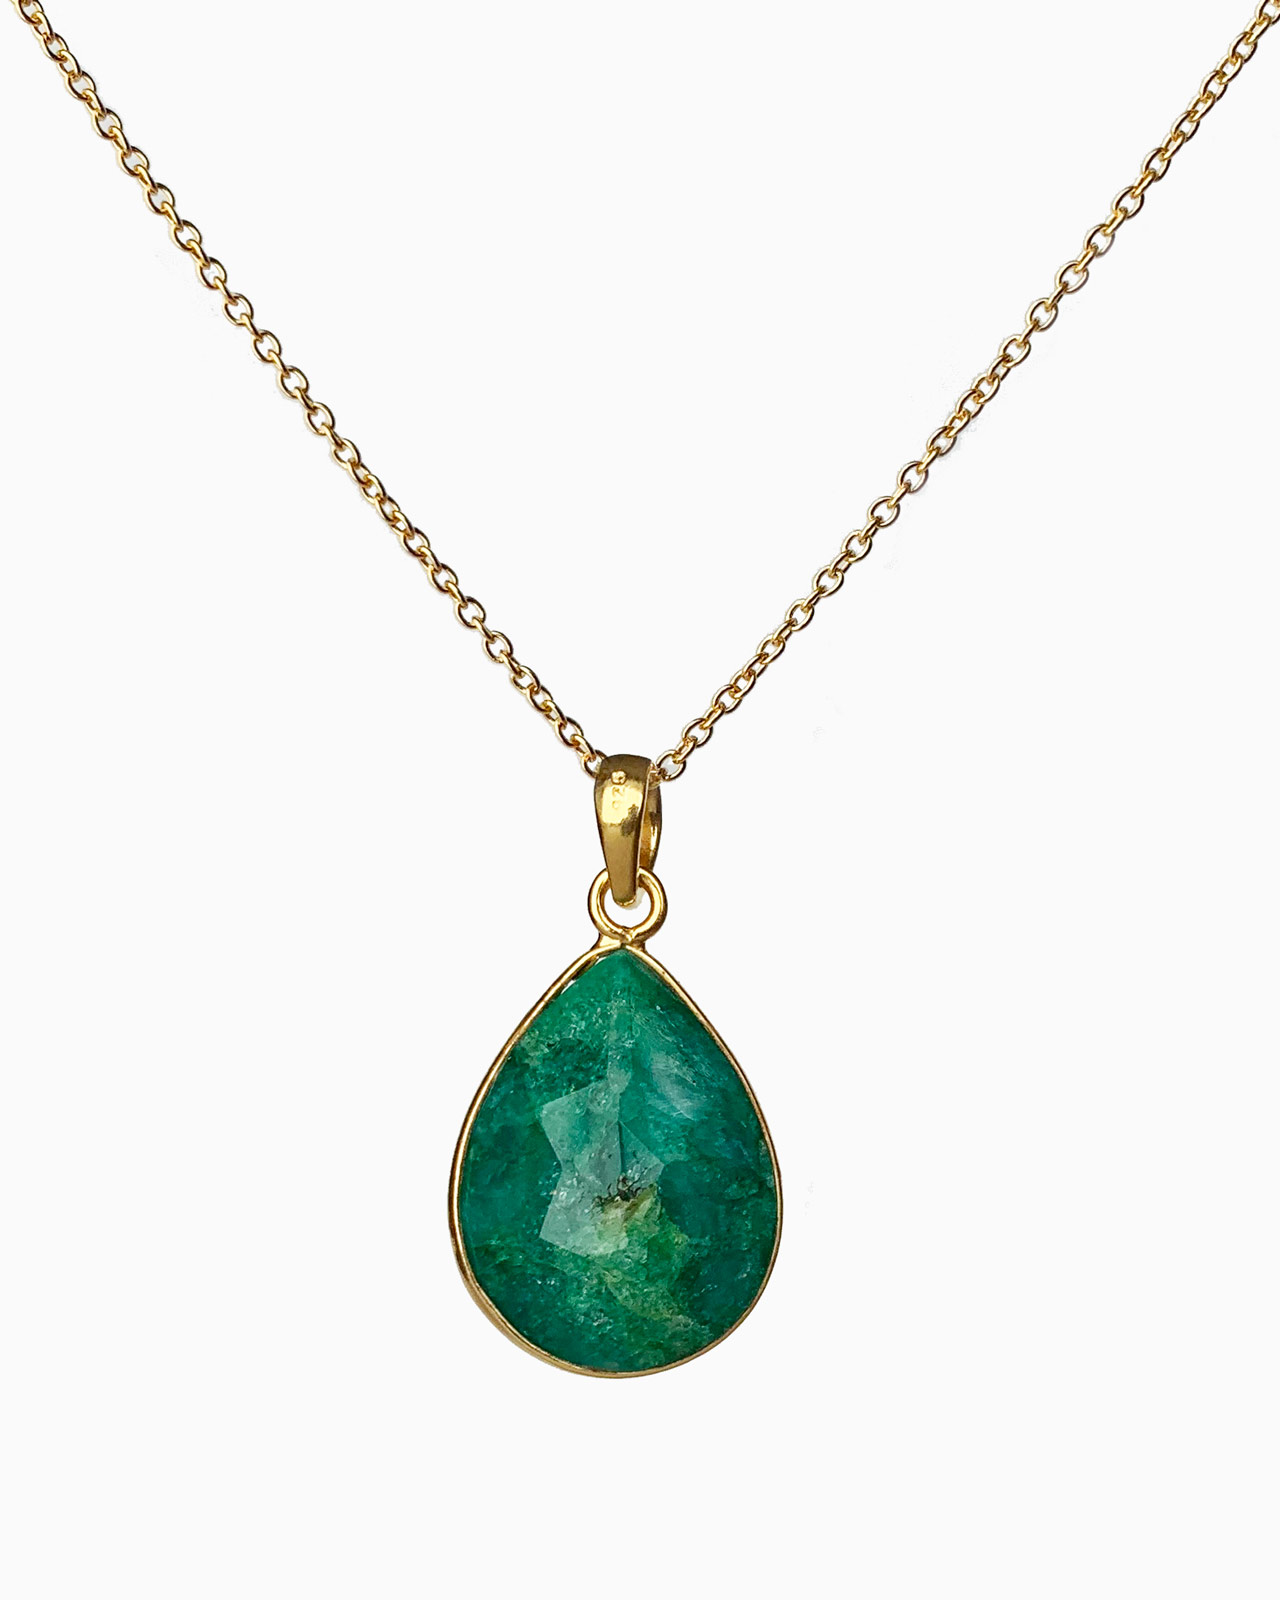 Large Emerald Pendant Necklace - Veda Jewelry